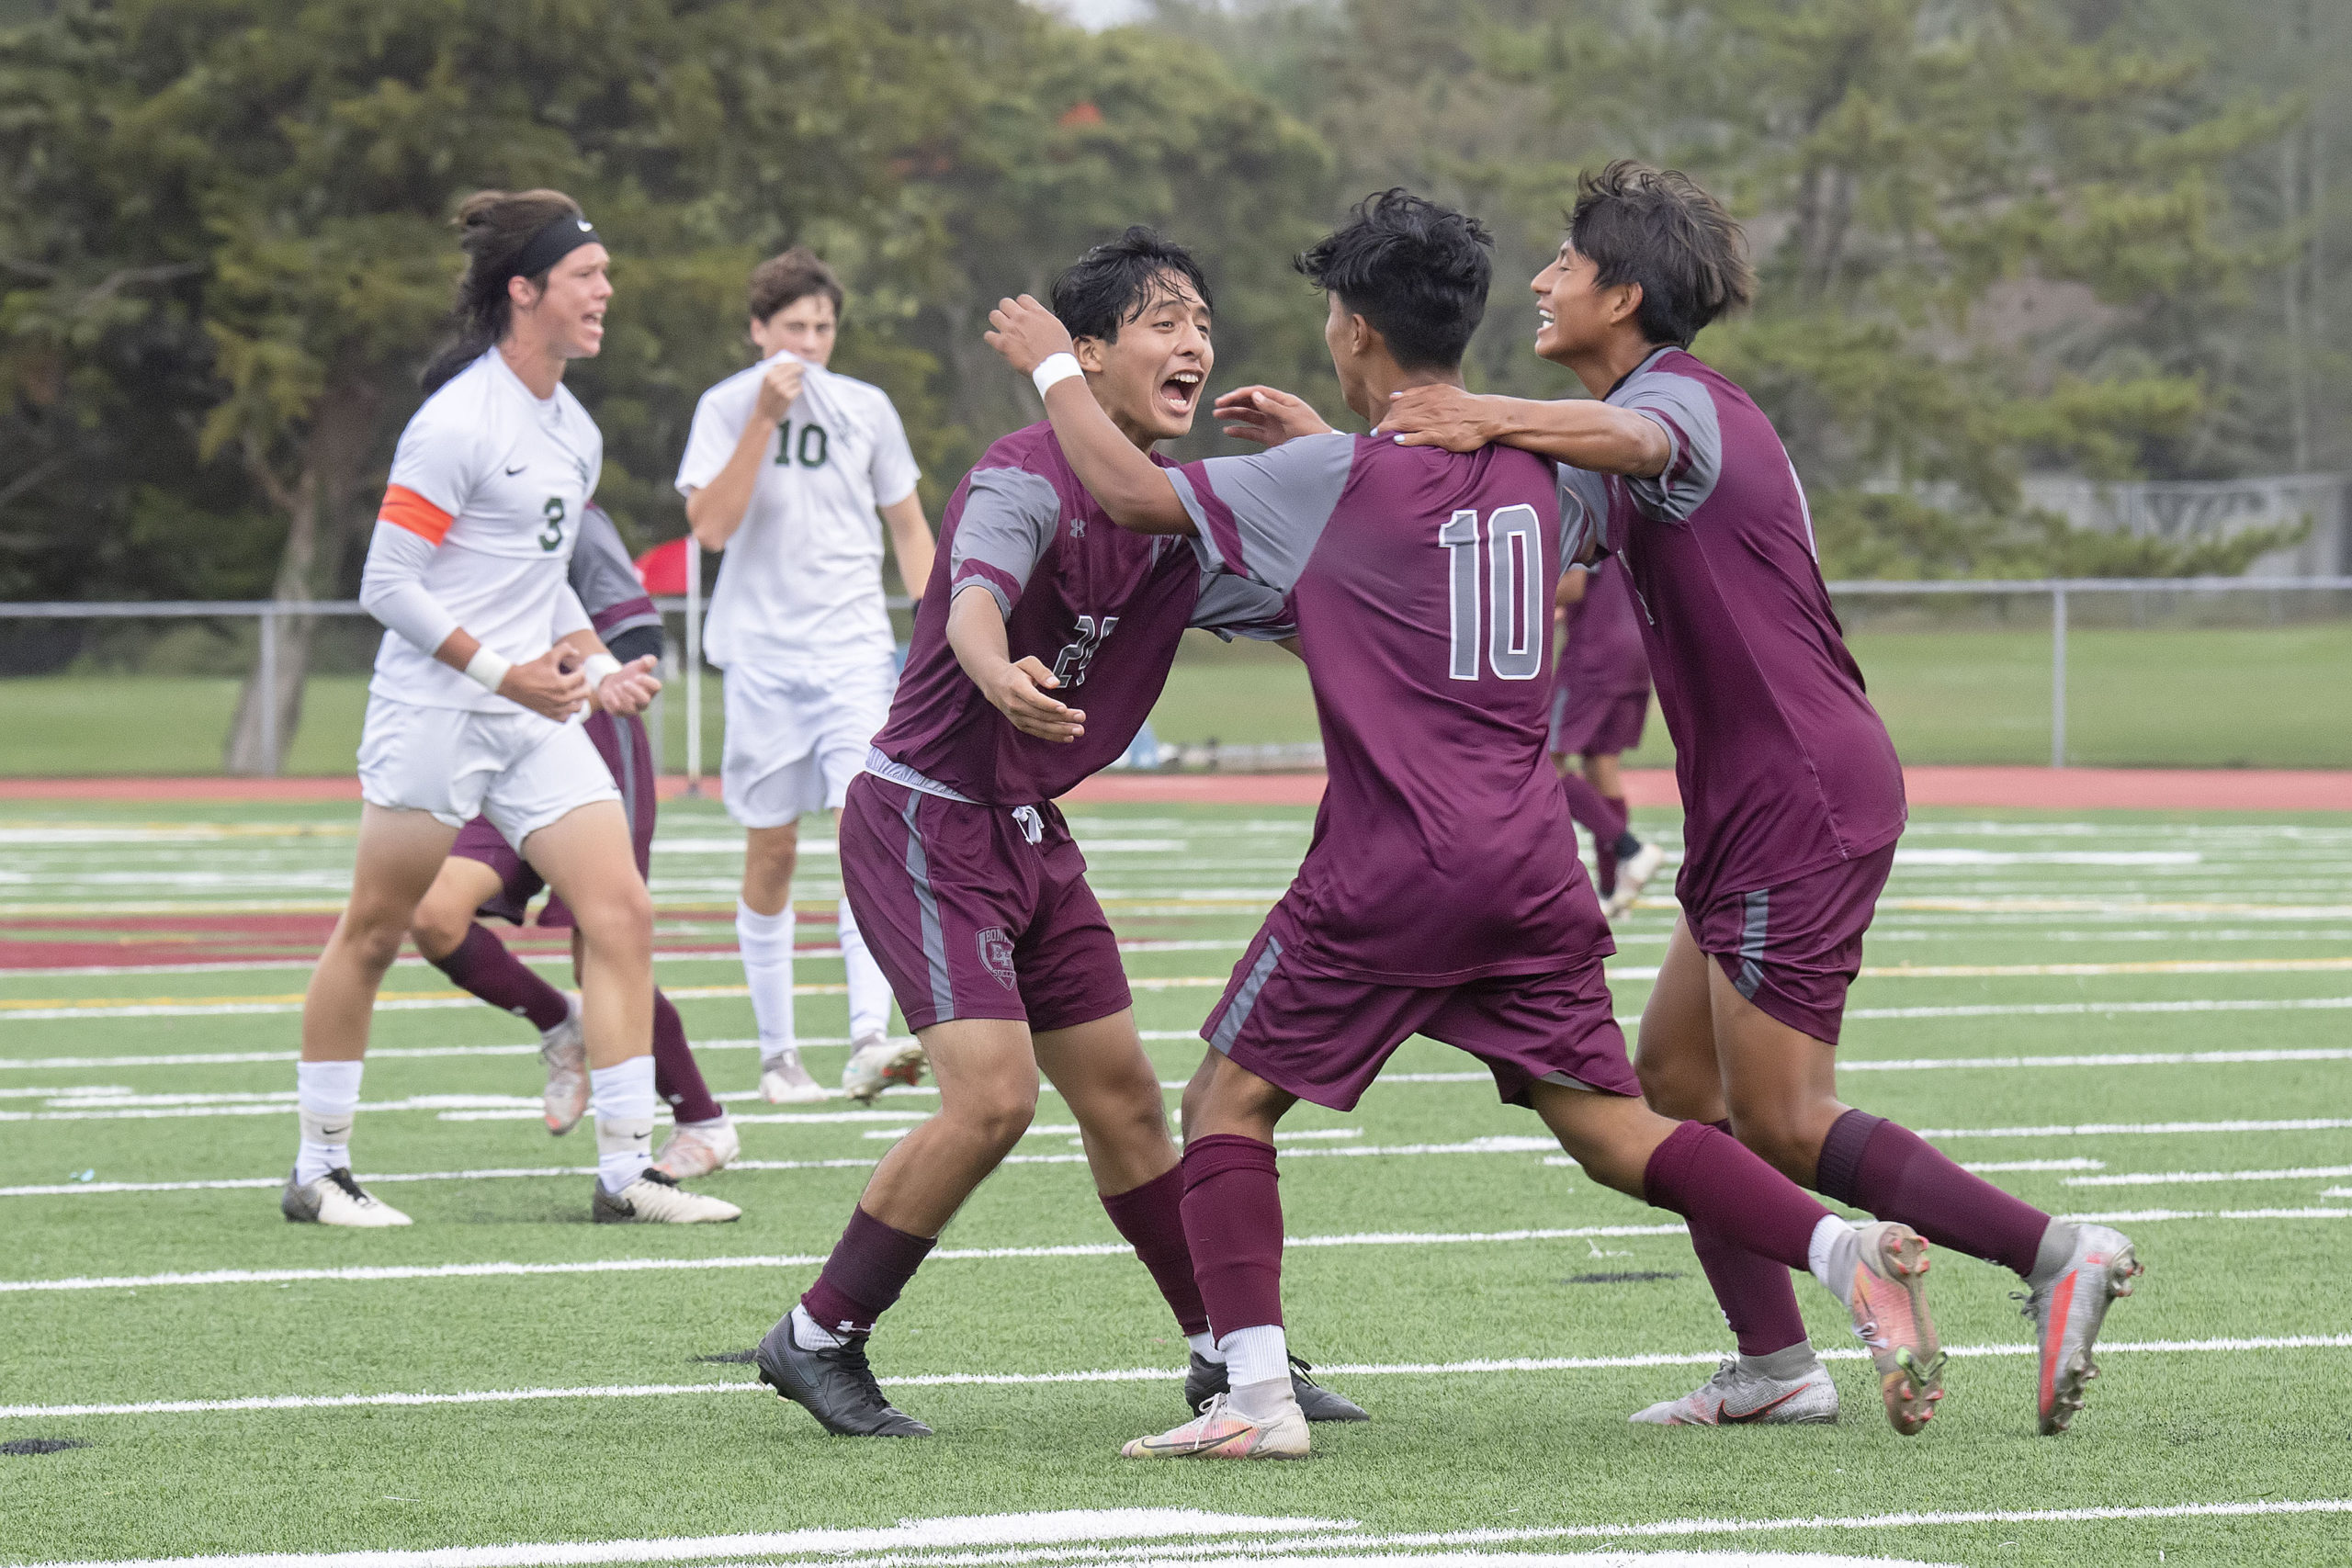 The Bonackers celebrate after scoring their second goal in what ended up being a big 3-1 victory over Harborfields this past Saturday.